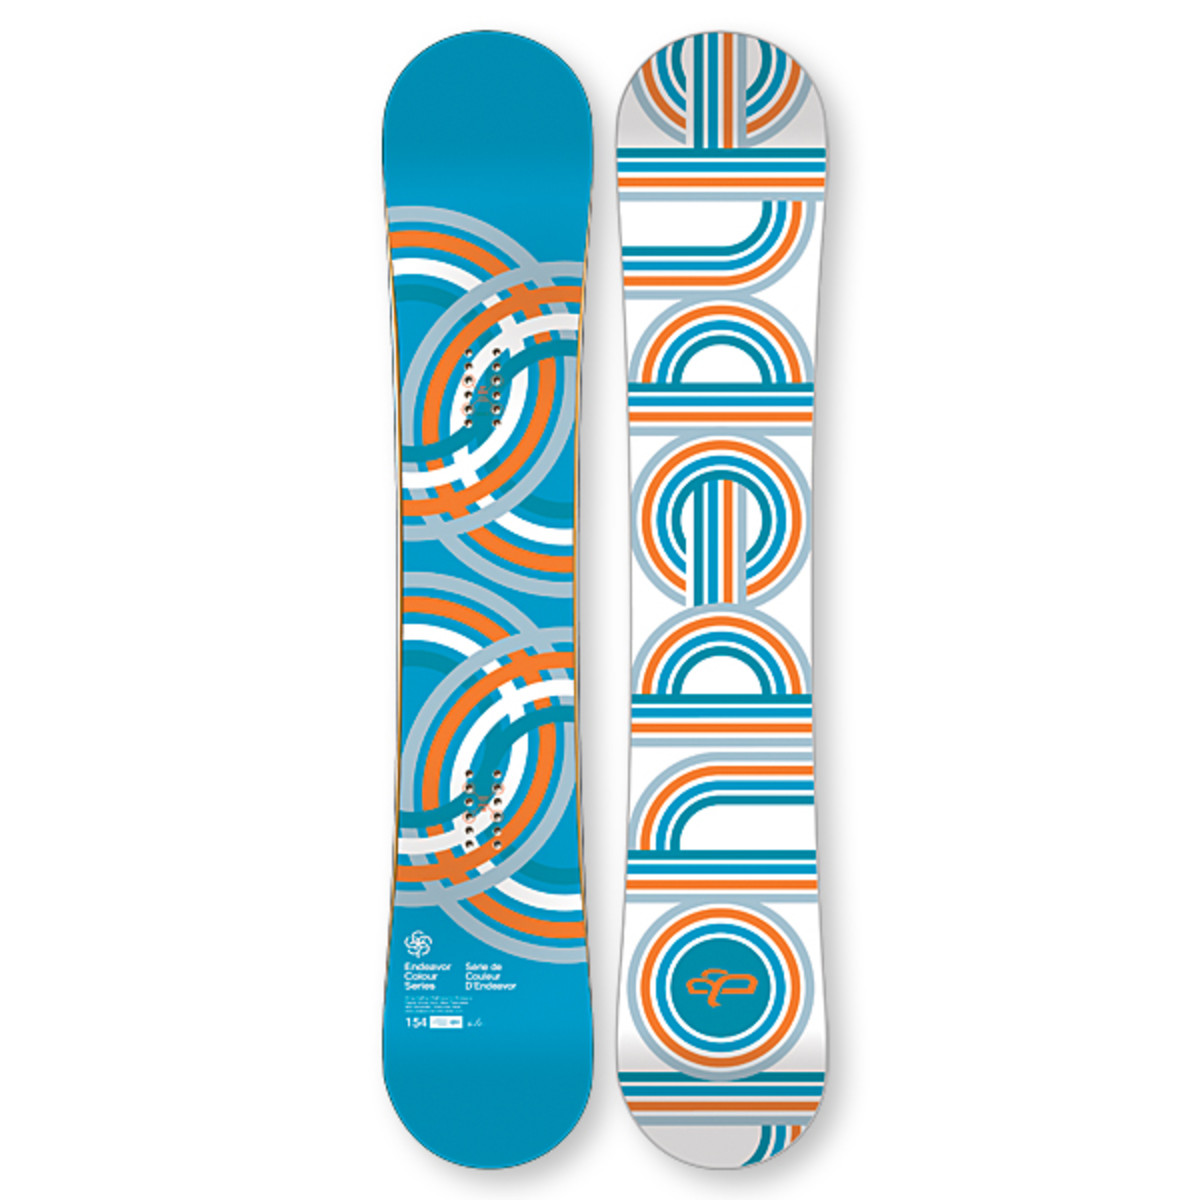 Buy Endeavor Colour Series Snowboard - Shop for Snowboard Gear at Snowboarder Magazine